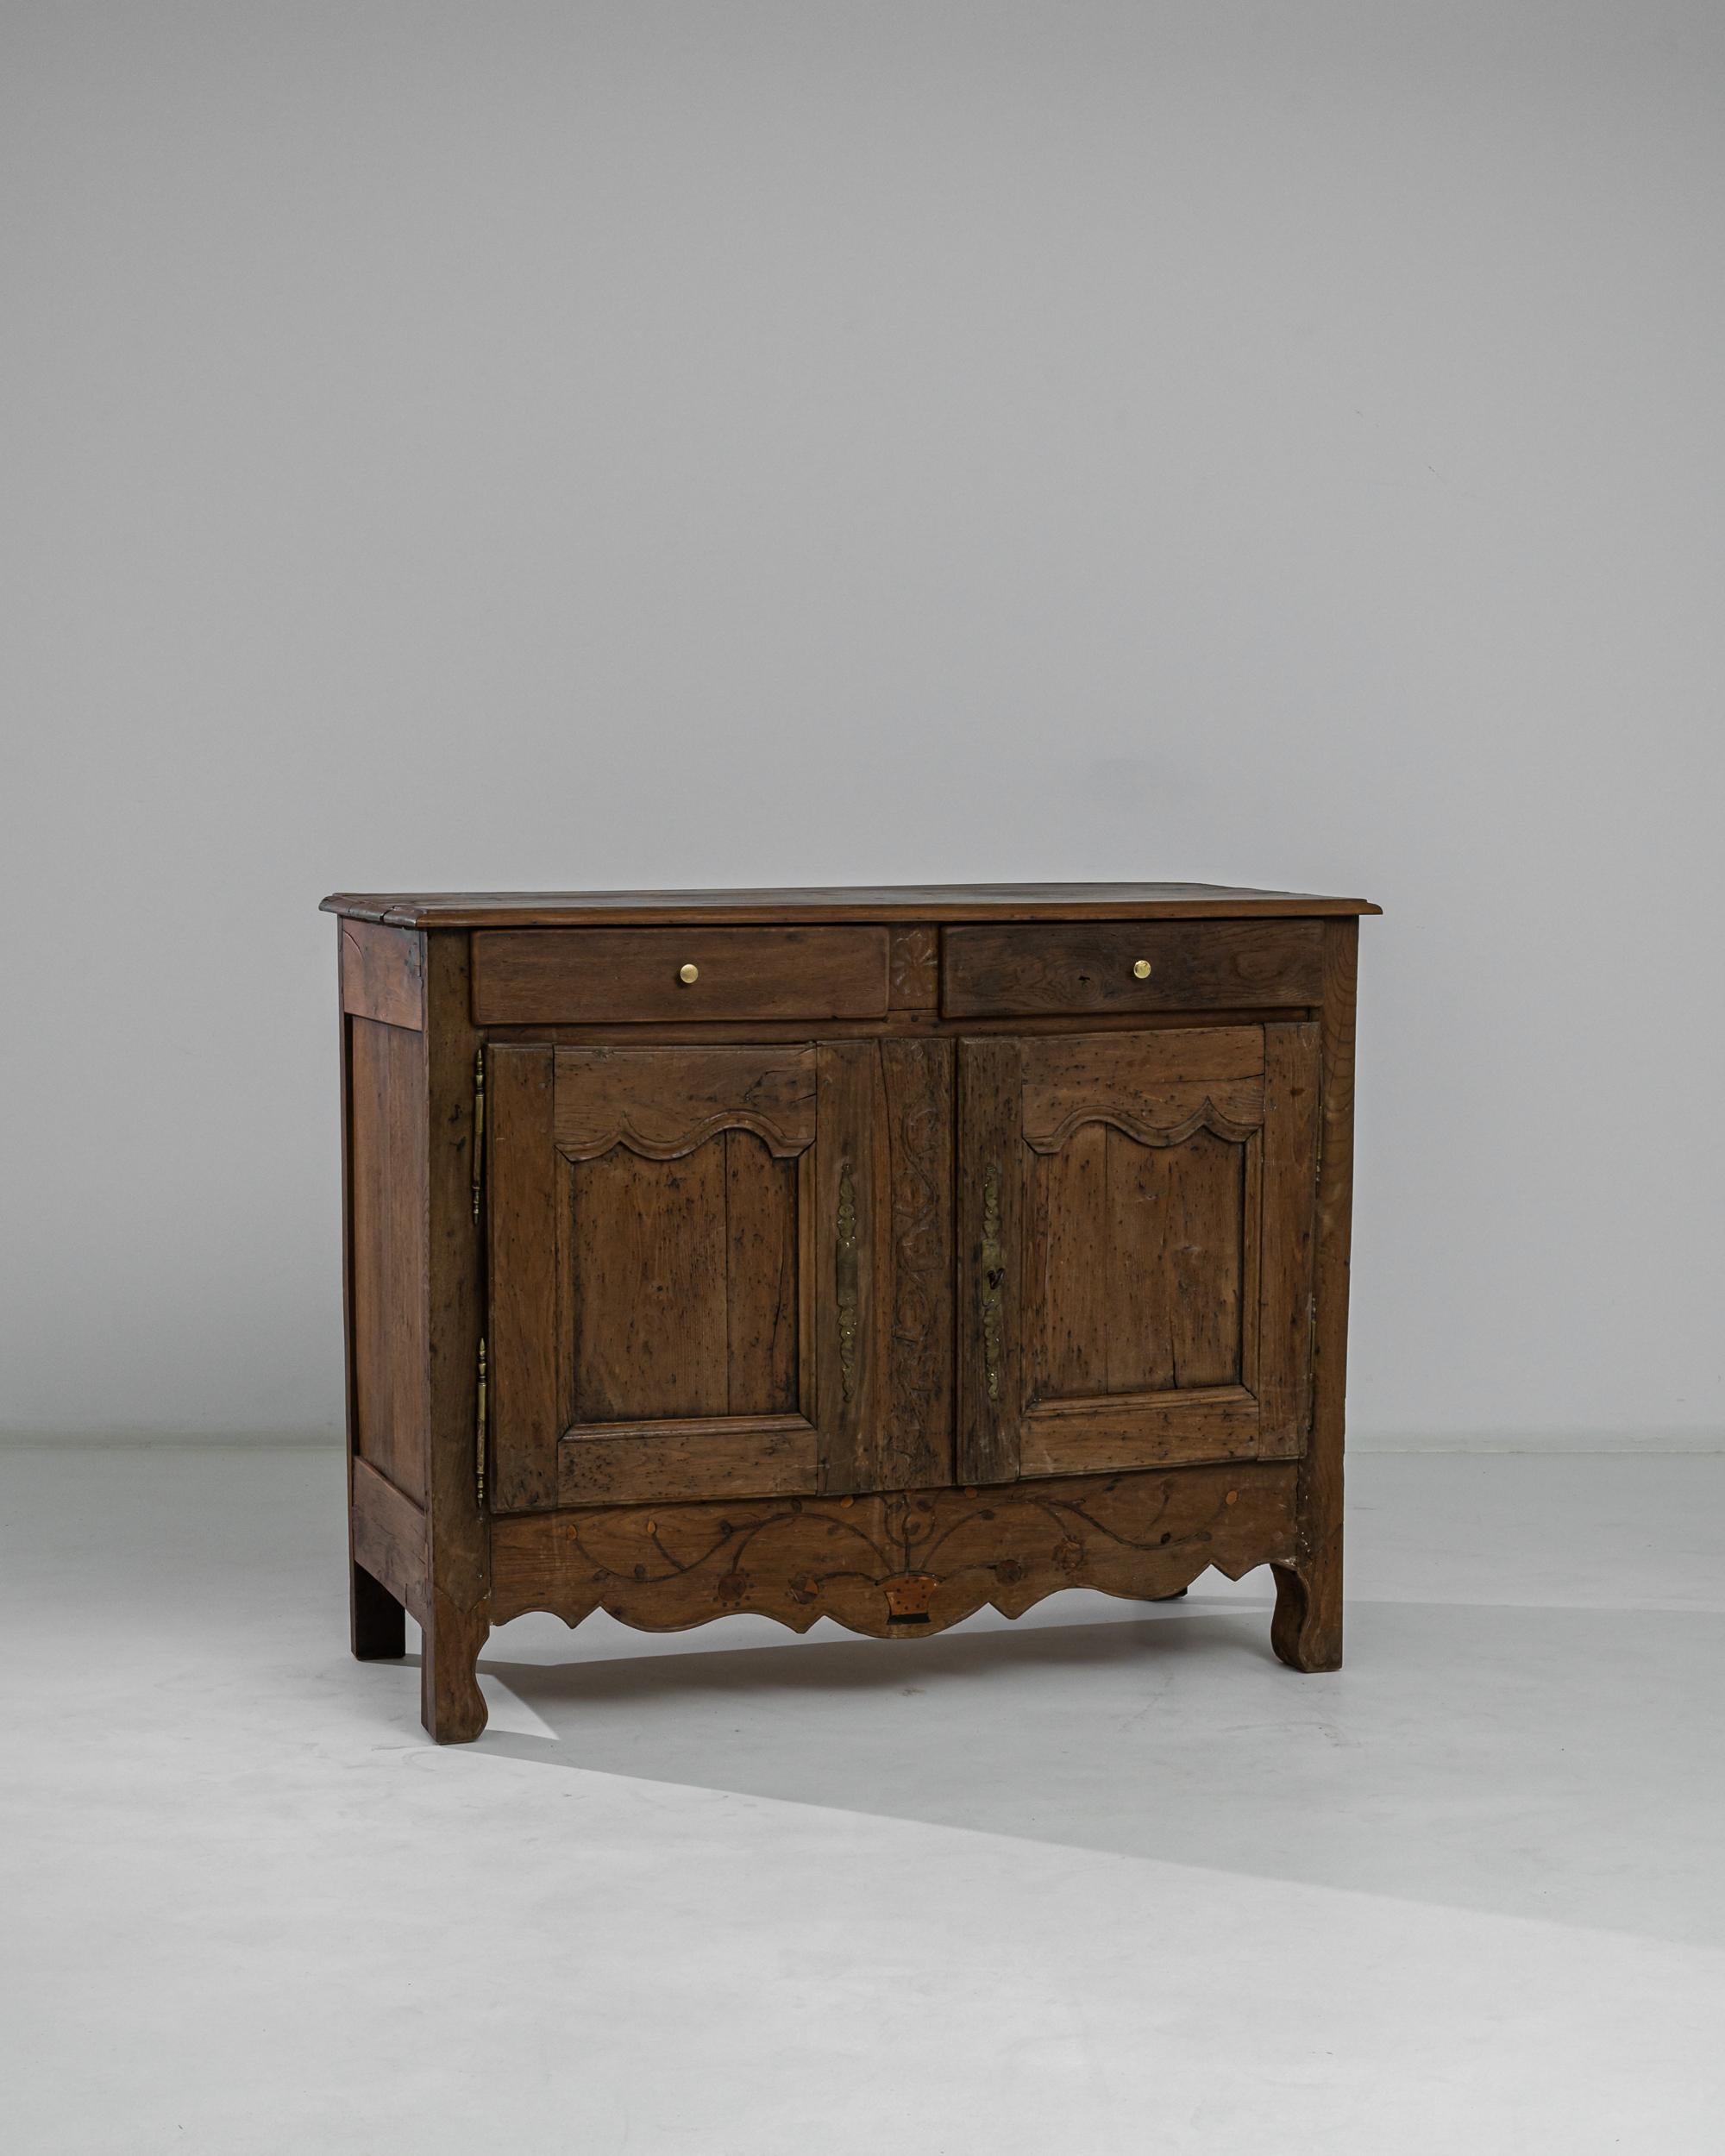 A French wooden buffet from the 1880s. Lively floral details carefully carved into this buffet’s rich wooden patina emit an almost childlike playfulness. A latticework of nuanced wood tones and inscribed metal details bring a dignified balance to